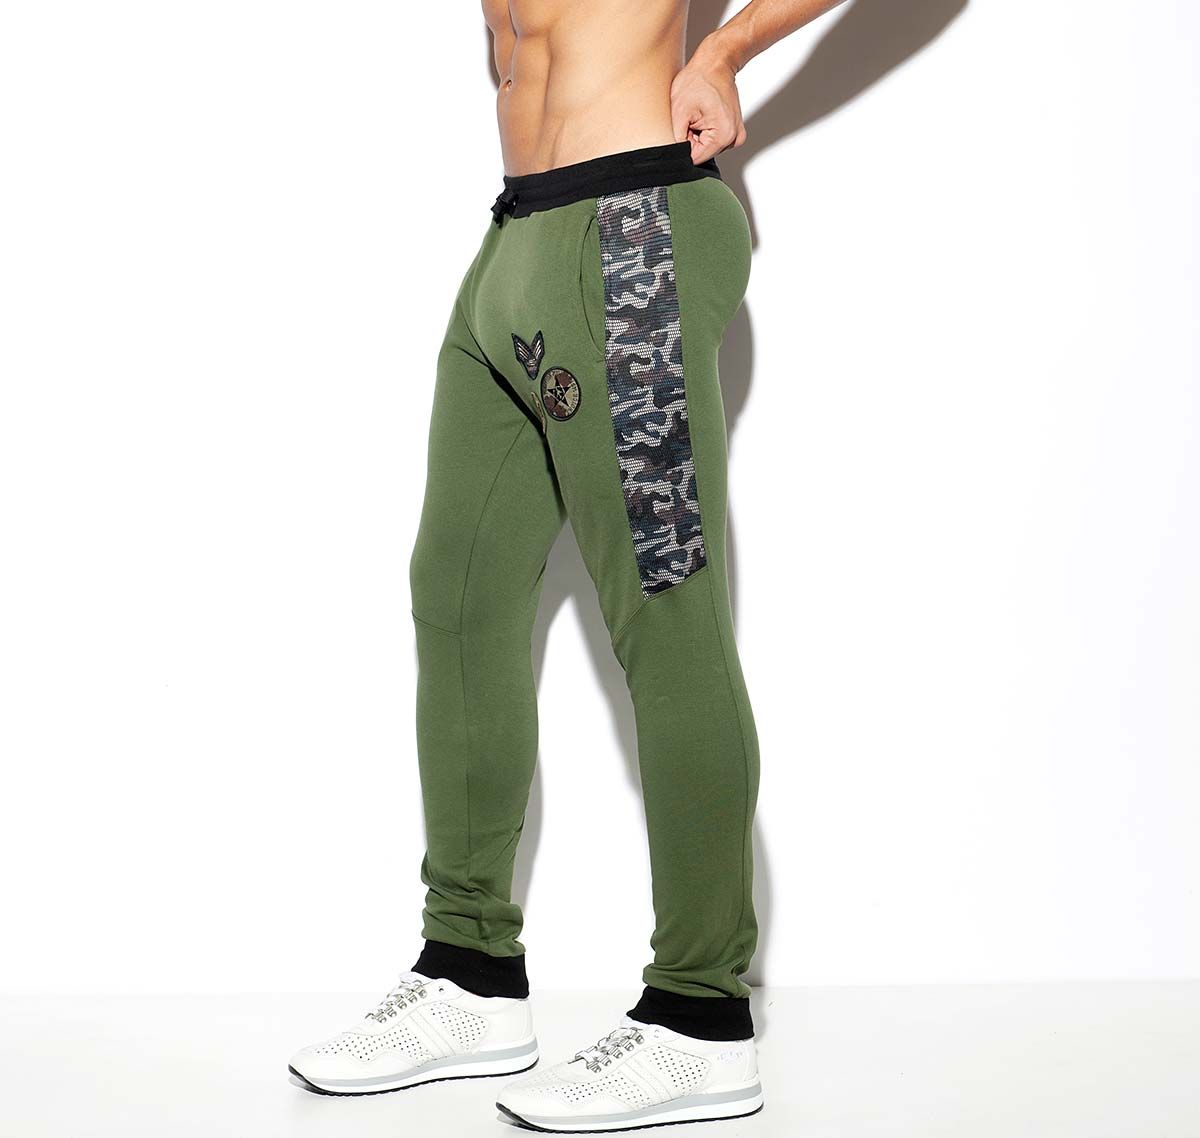 ES Collection Pantaloni sportivi lunghi ARMY PADDED SPORT PANTS SP221, verde